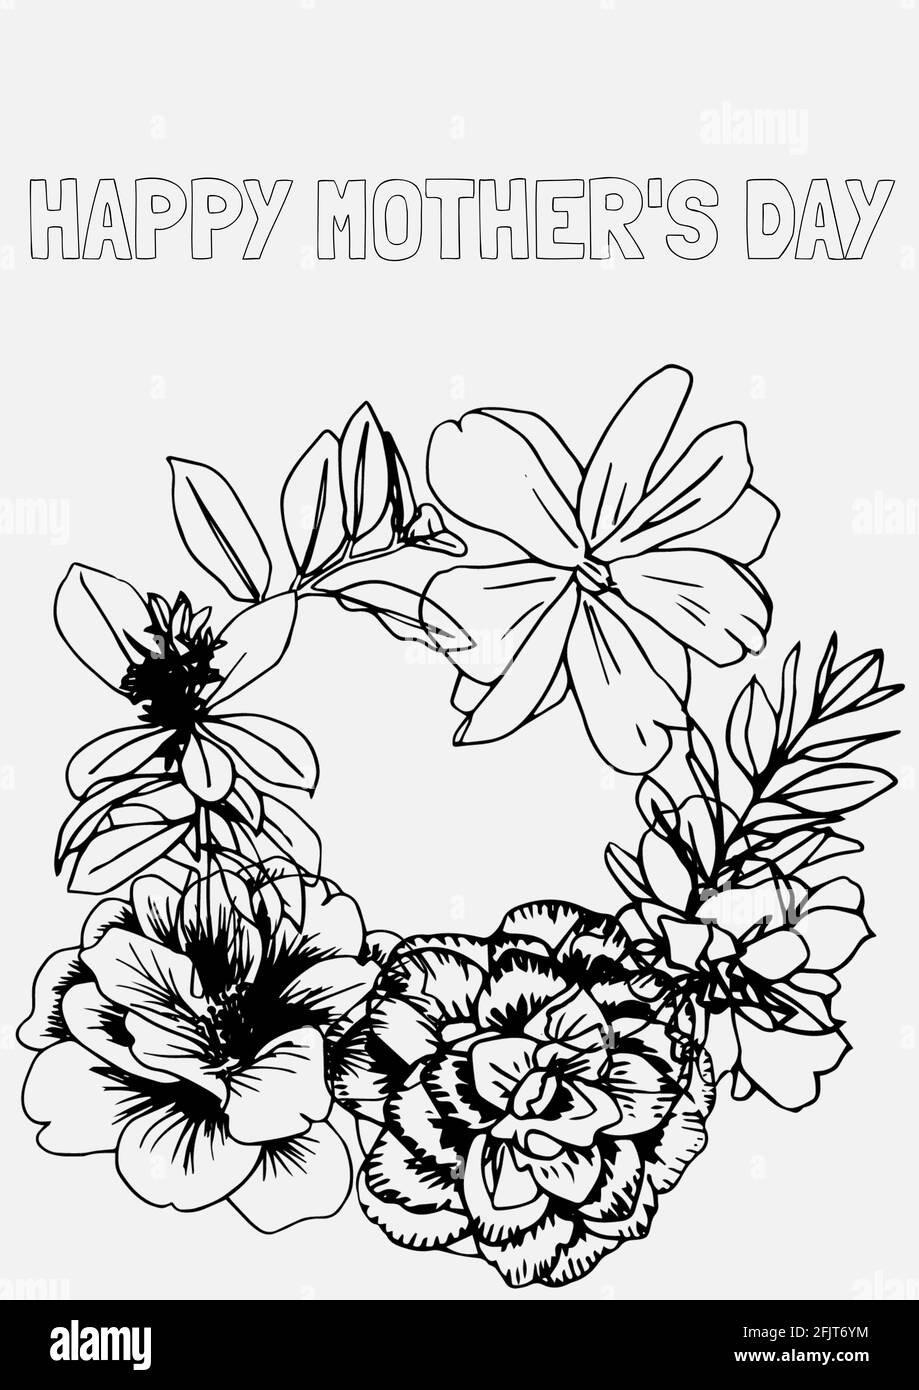 Happy mothers day text over floral design against white background Stock Photo